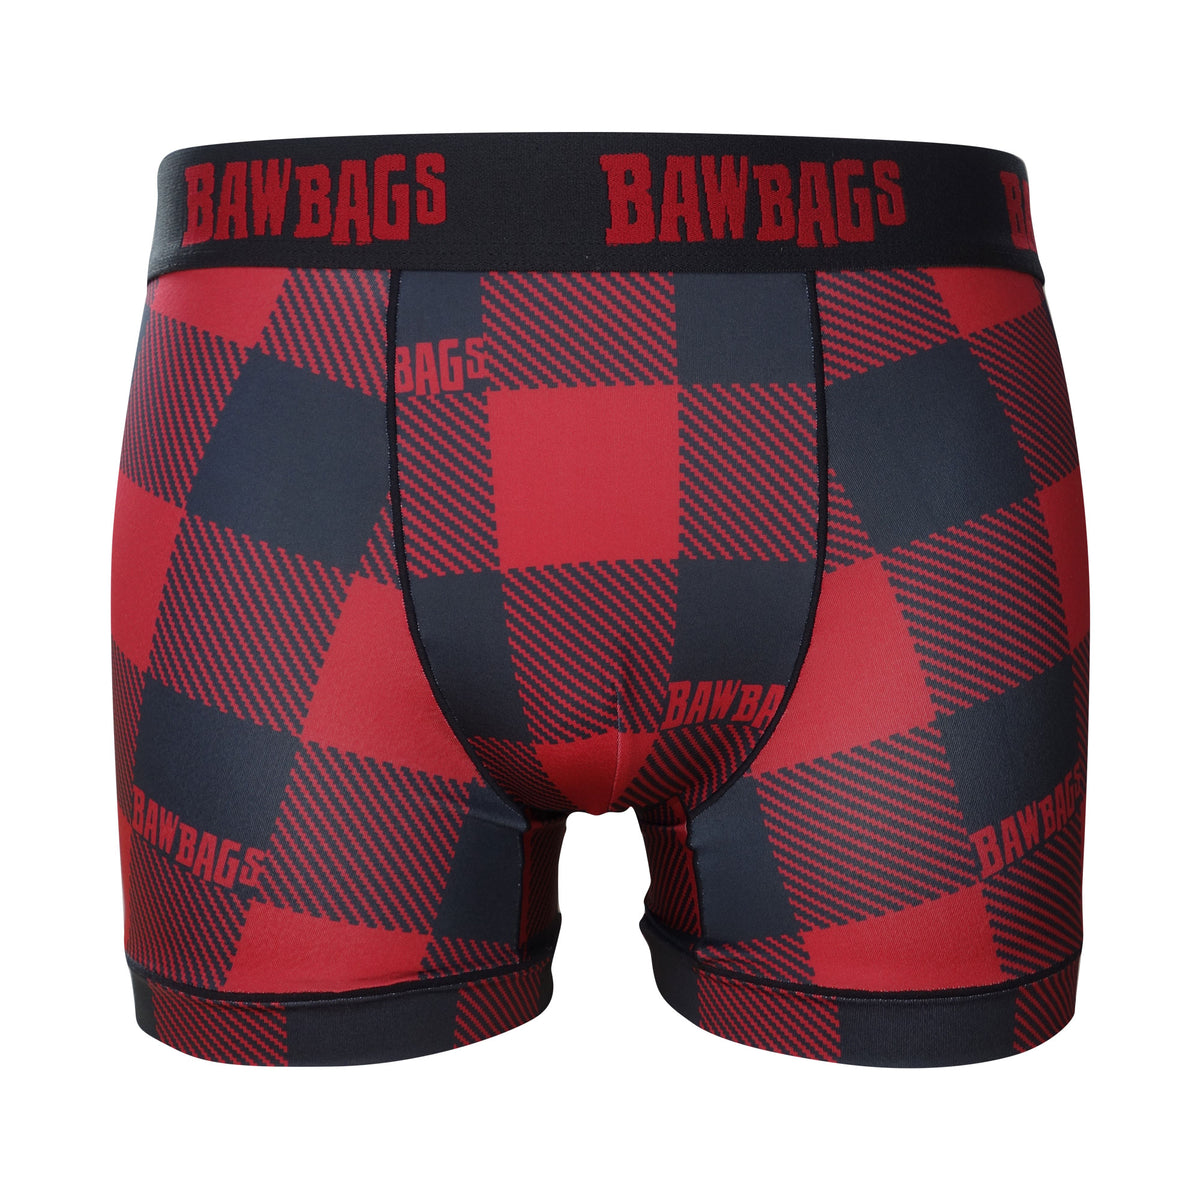 3 Pack of Mens Boxer Shorts, Briefs - Bawbags